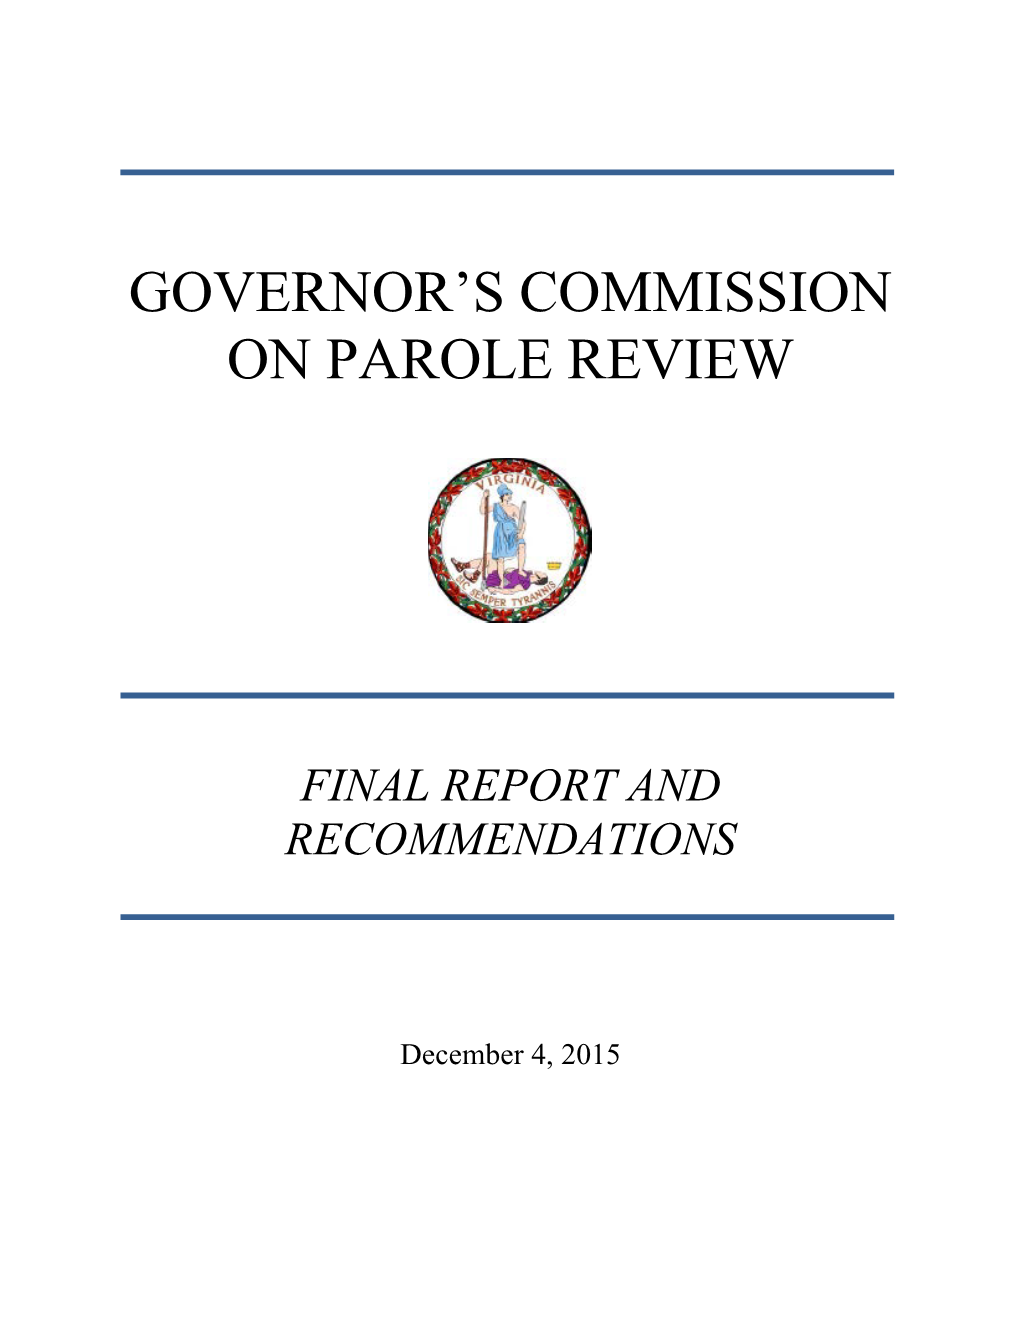 Governor's Commission on Parole Review Page 2